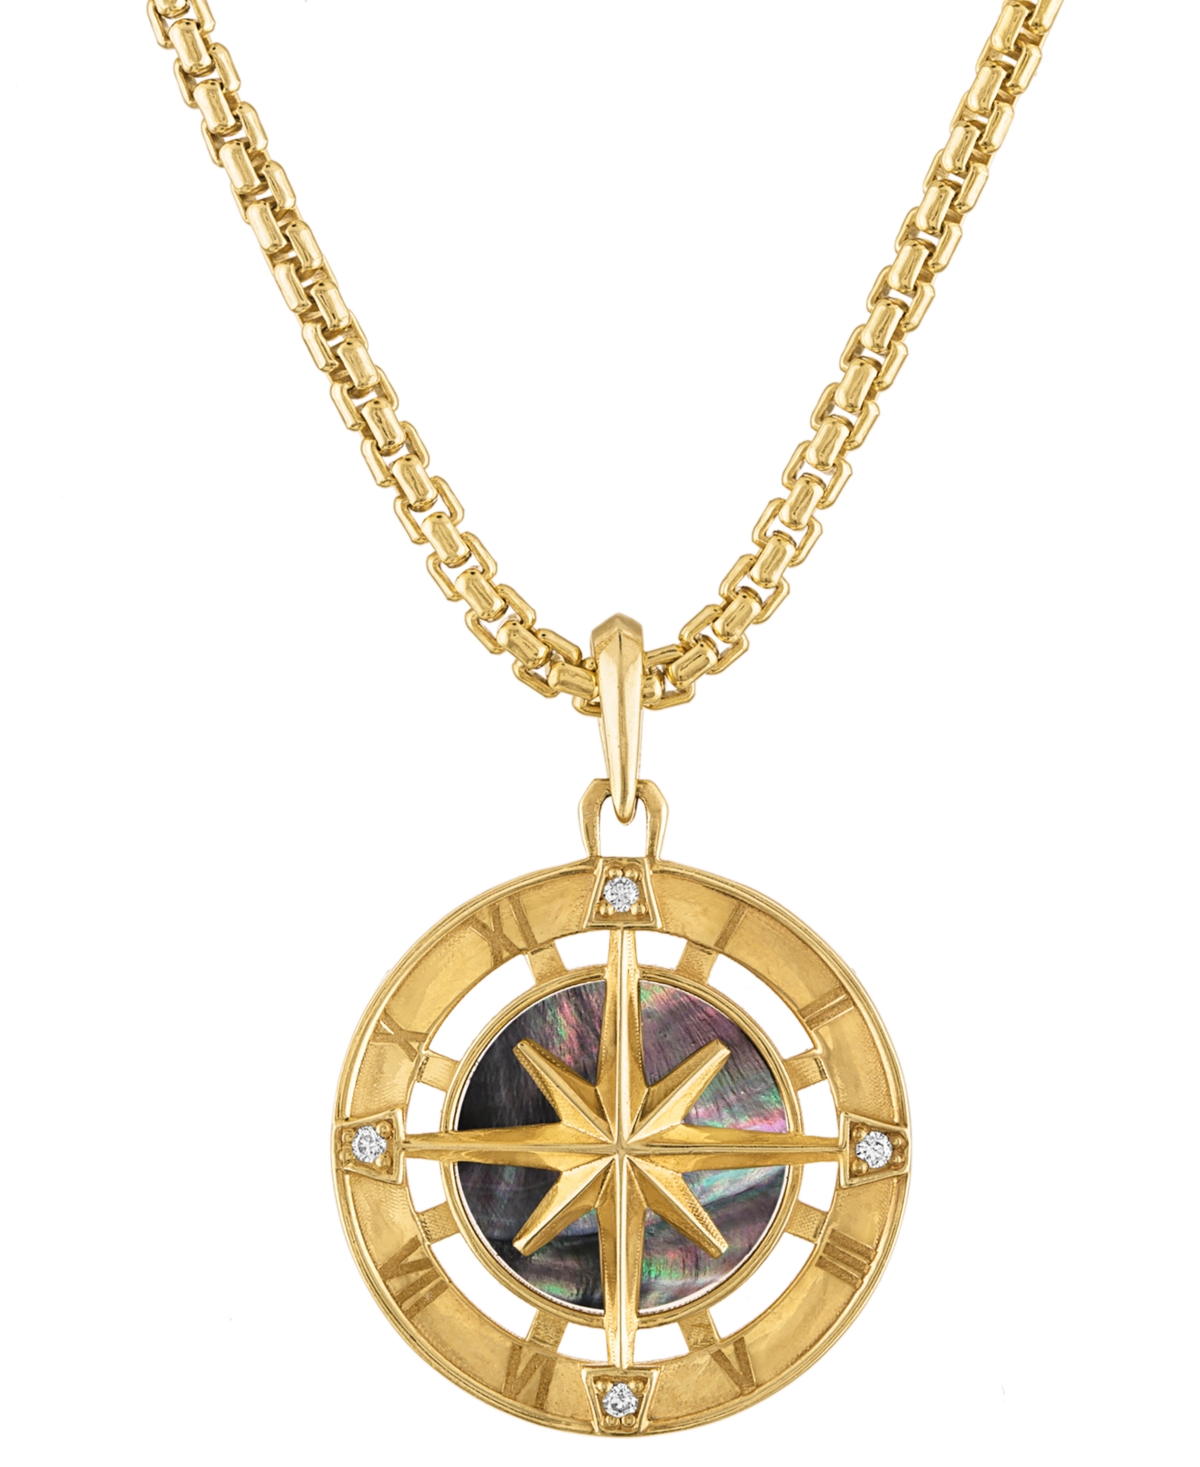 Bulova Men's Marine Star Diamond (1/20 Ct. T.w.) Pendant Necklace In 14k Gold-plated Sterling Silver, 24" + In Na